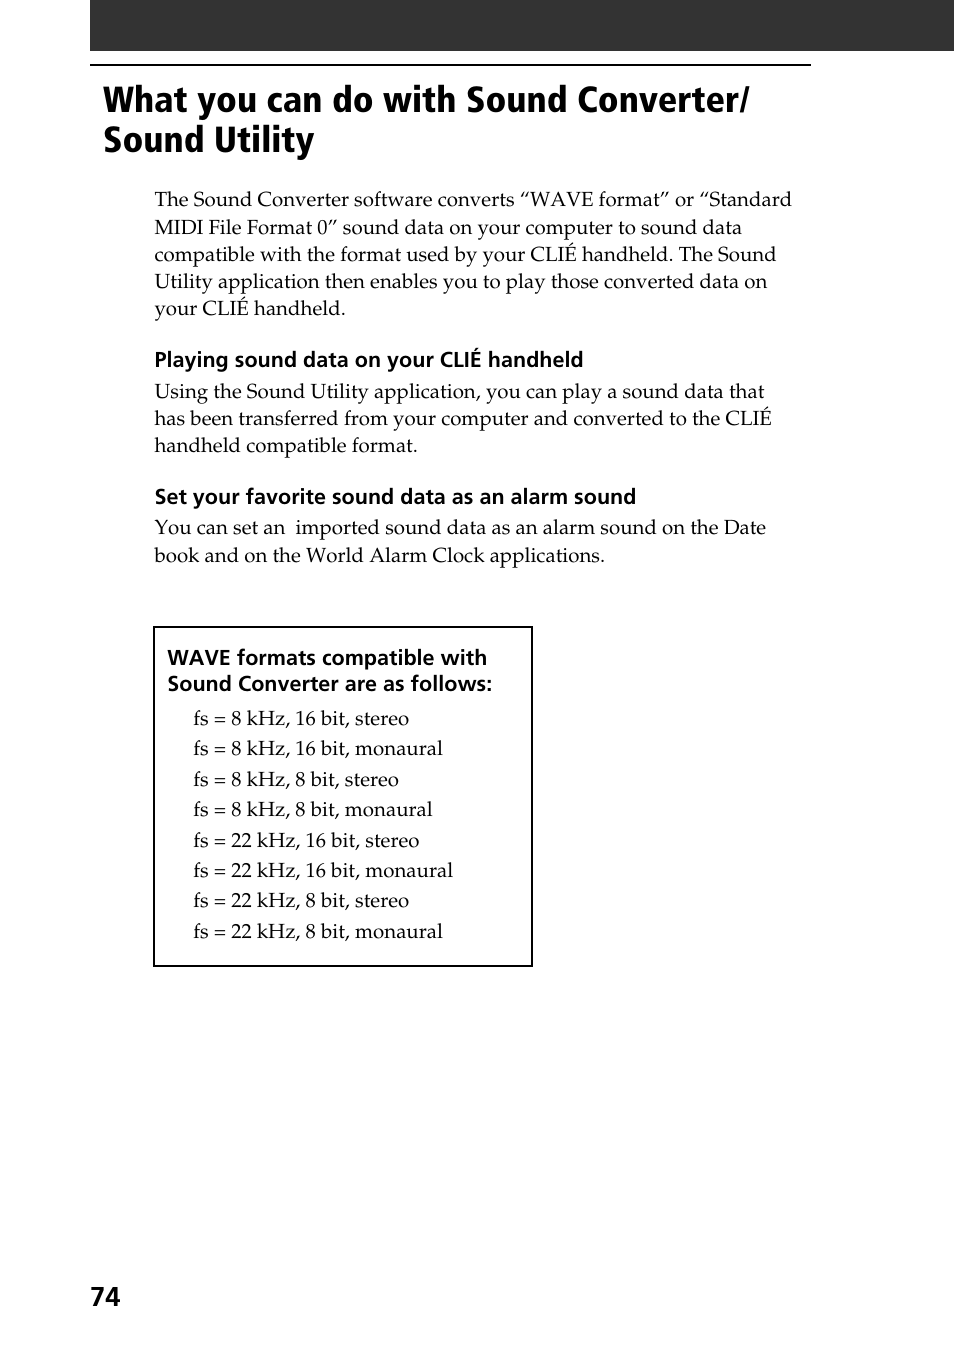 What you can do with sound converter/sound utility | Sony PEG-T615C User Manual | Page 74 / 104